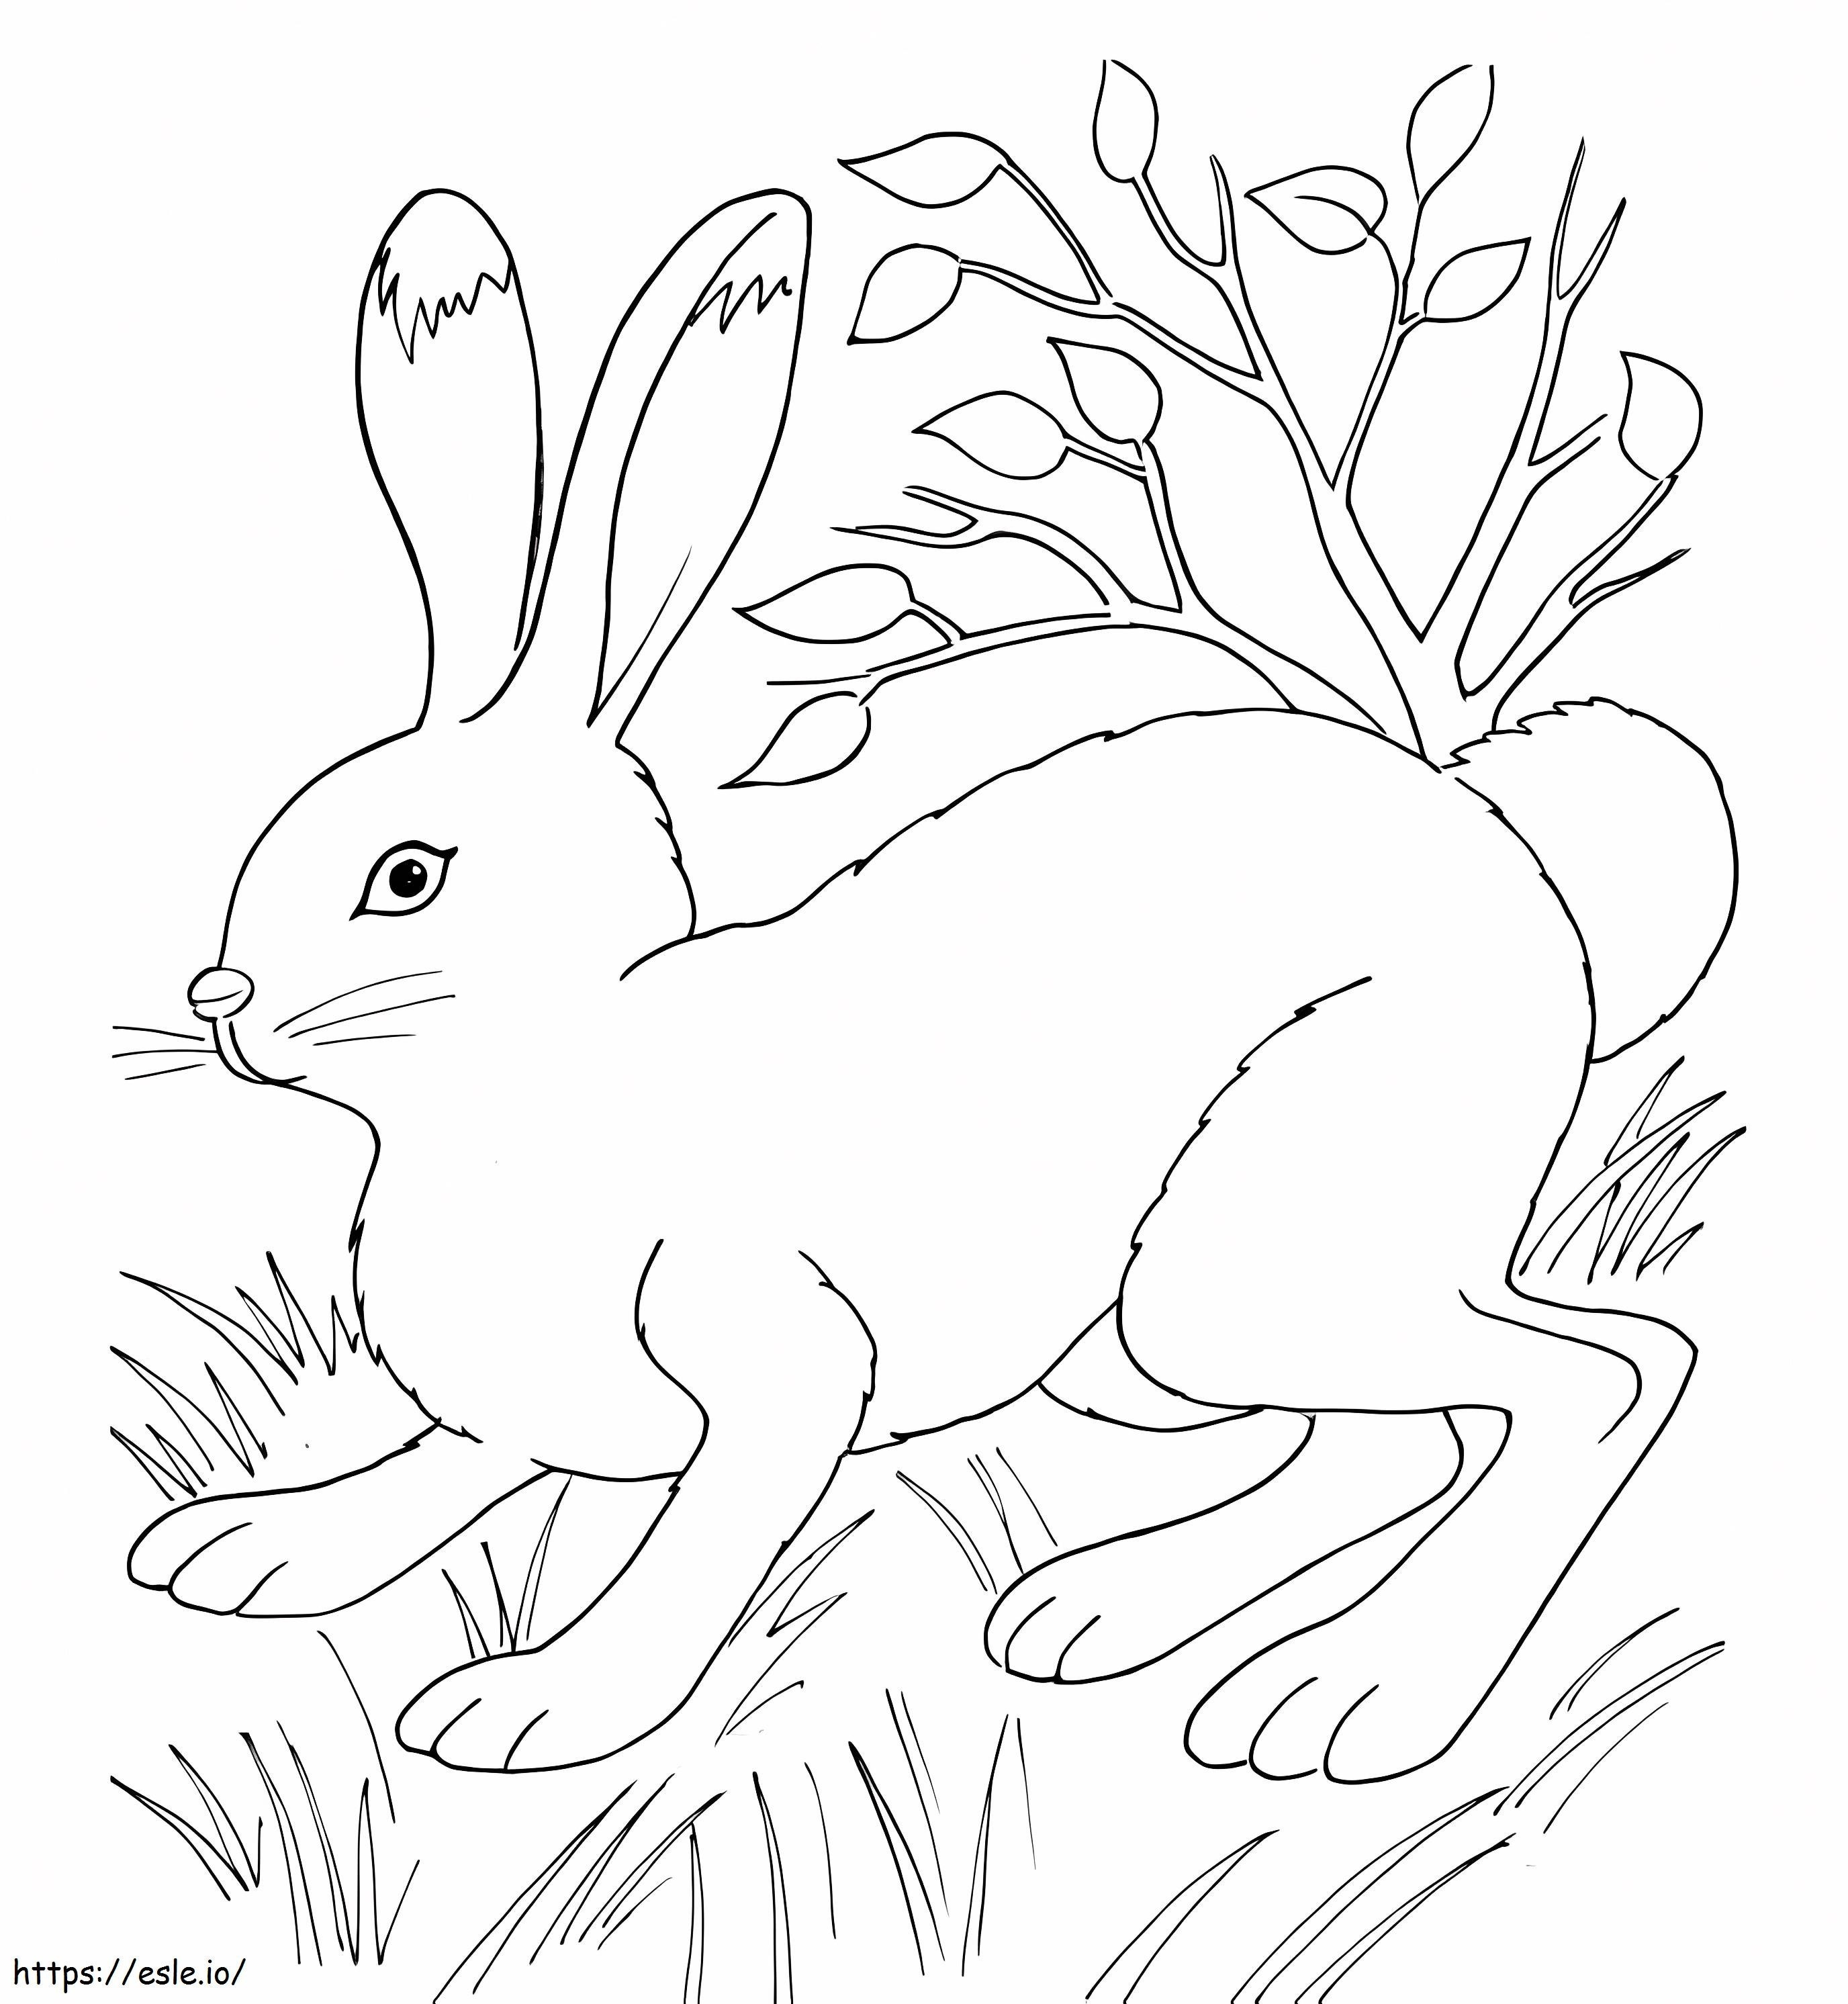 Rabbit In The Grass coloring page